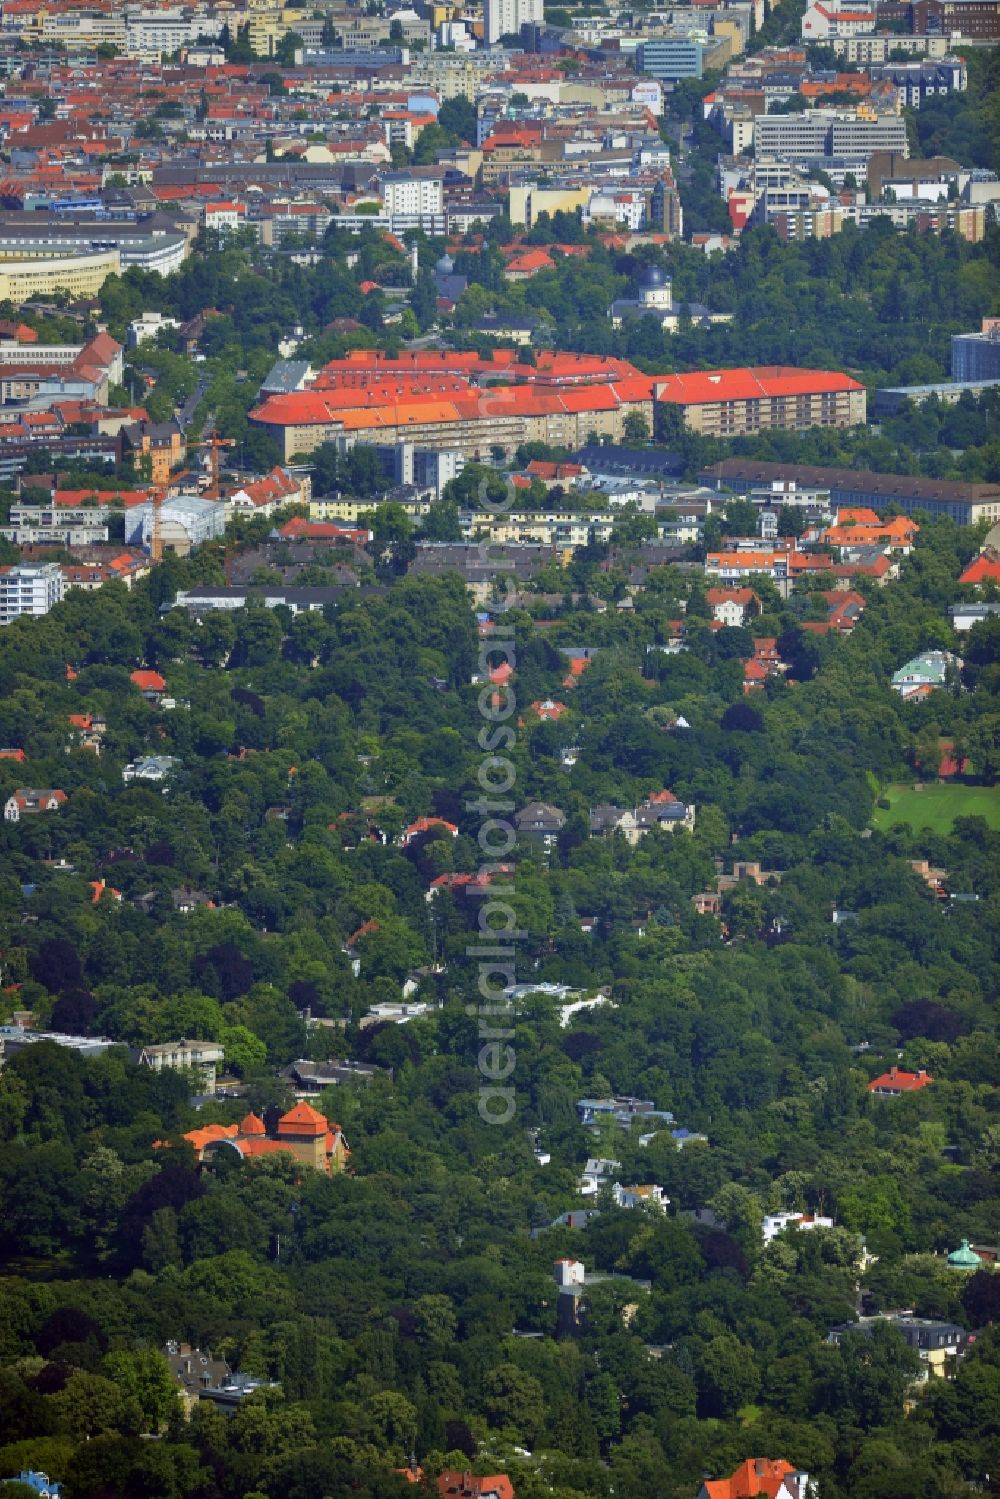 Aerial image Berlin - Partial view of the city and residential areas Grunewald Schmargendorf in destrict Charlottenburg-Wilmersdorf of Berlin